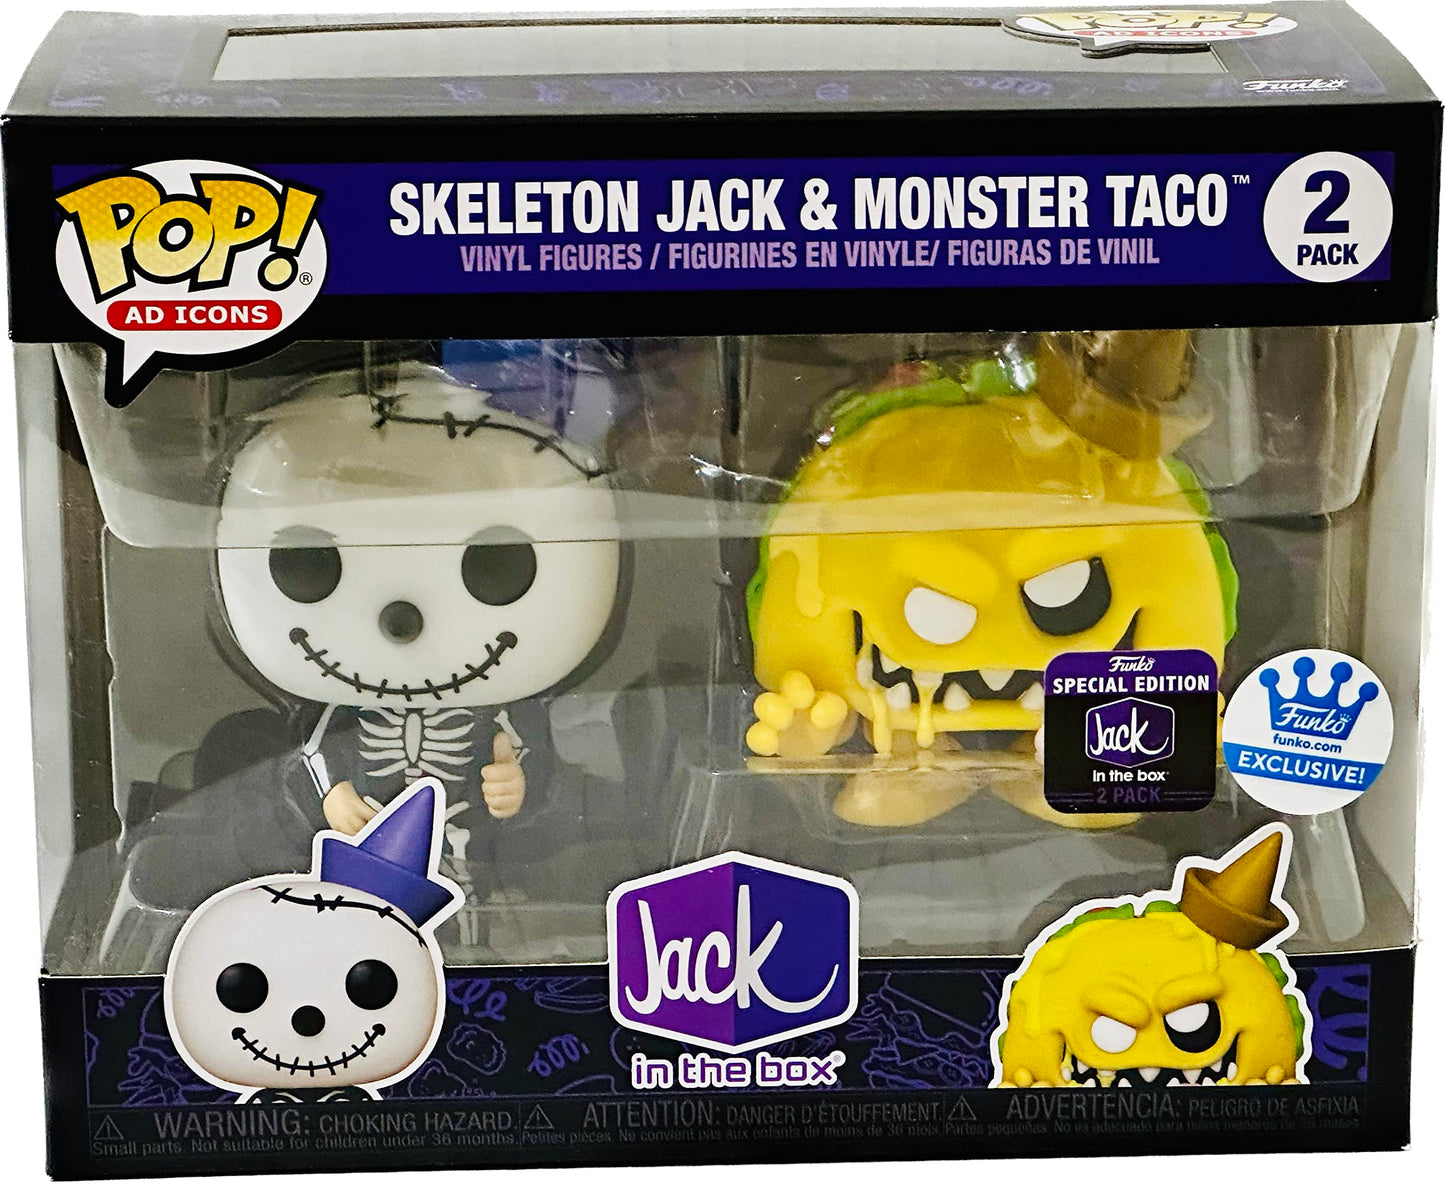 Funko POP! Ad Icons Jack in the Box Skeleton Jack & Monster Taco 2-Pack Exclusive